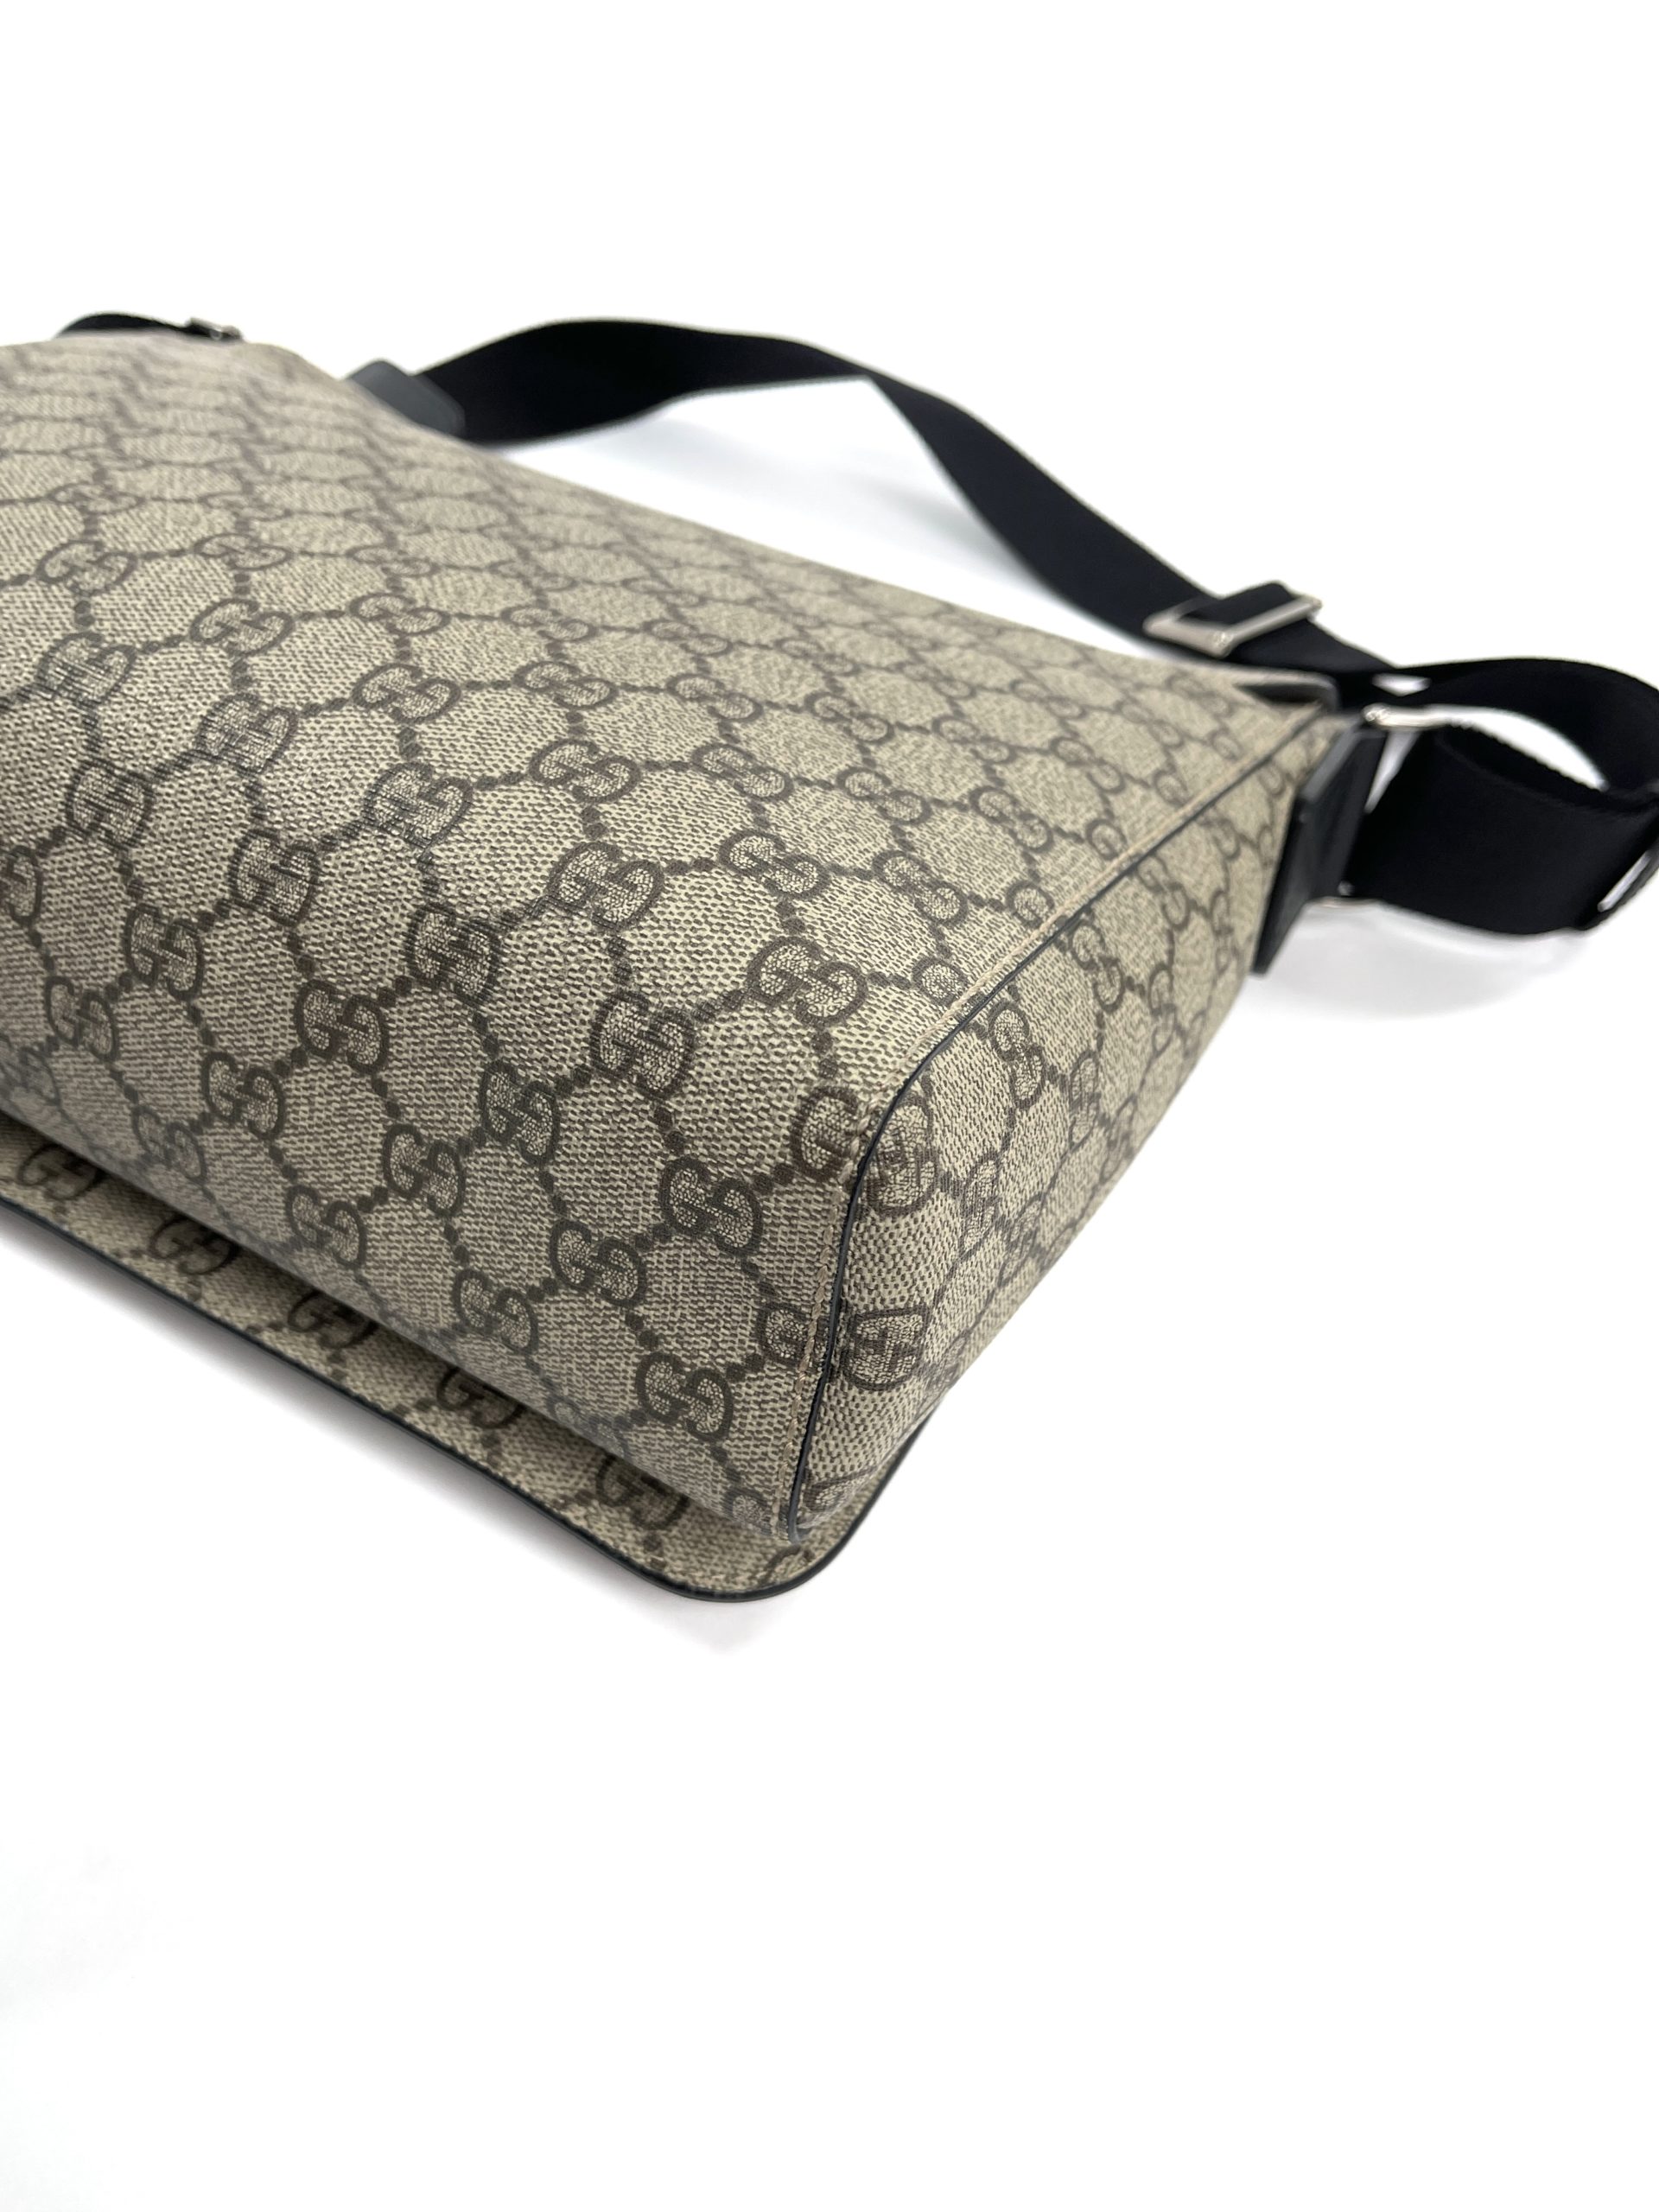 Gucci Beige/Blue GG Canvas and Leather Web Cosmetic Pouch Gucci